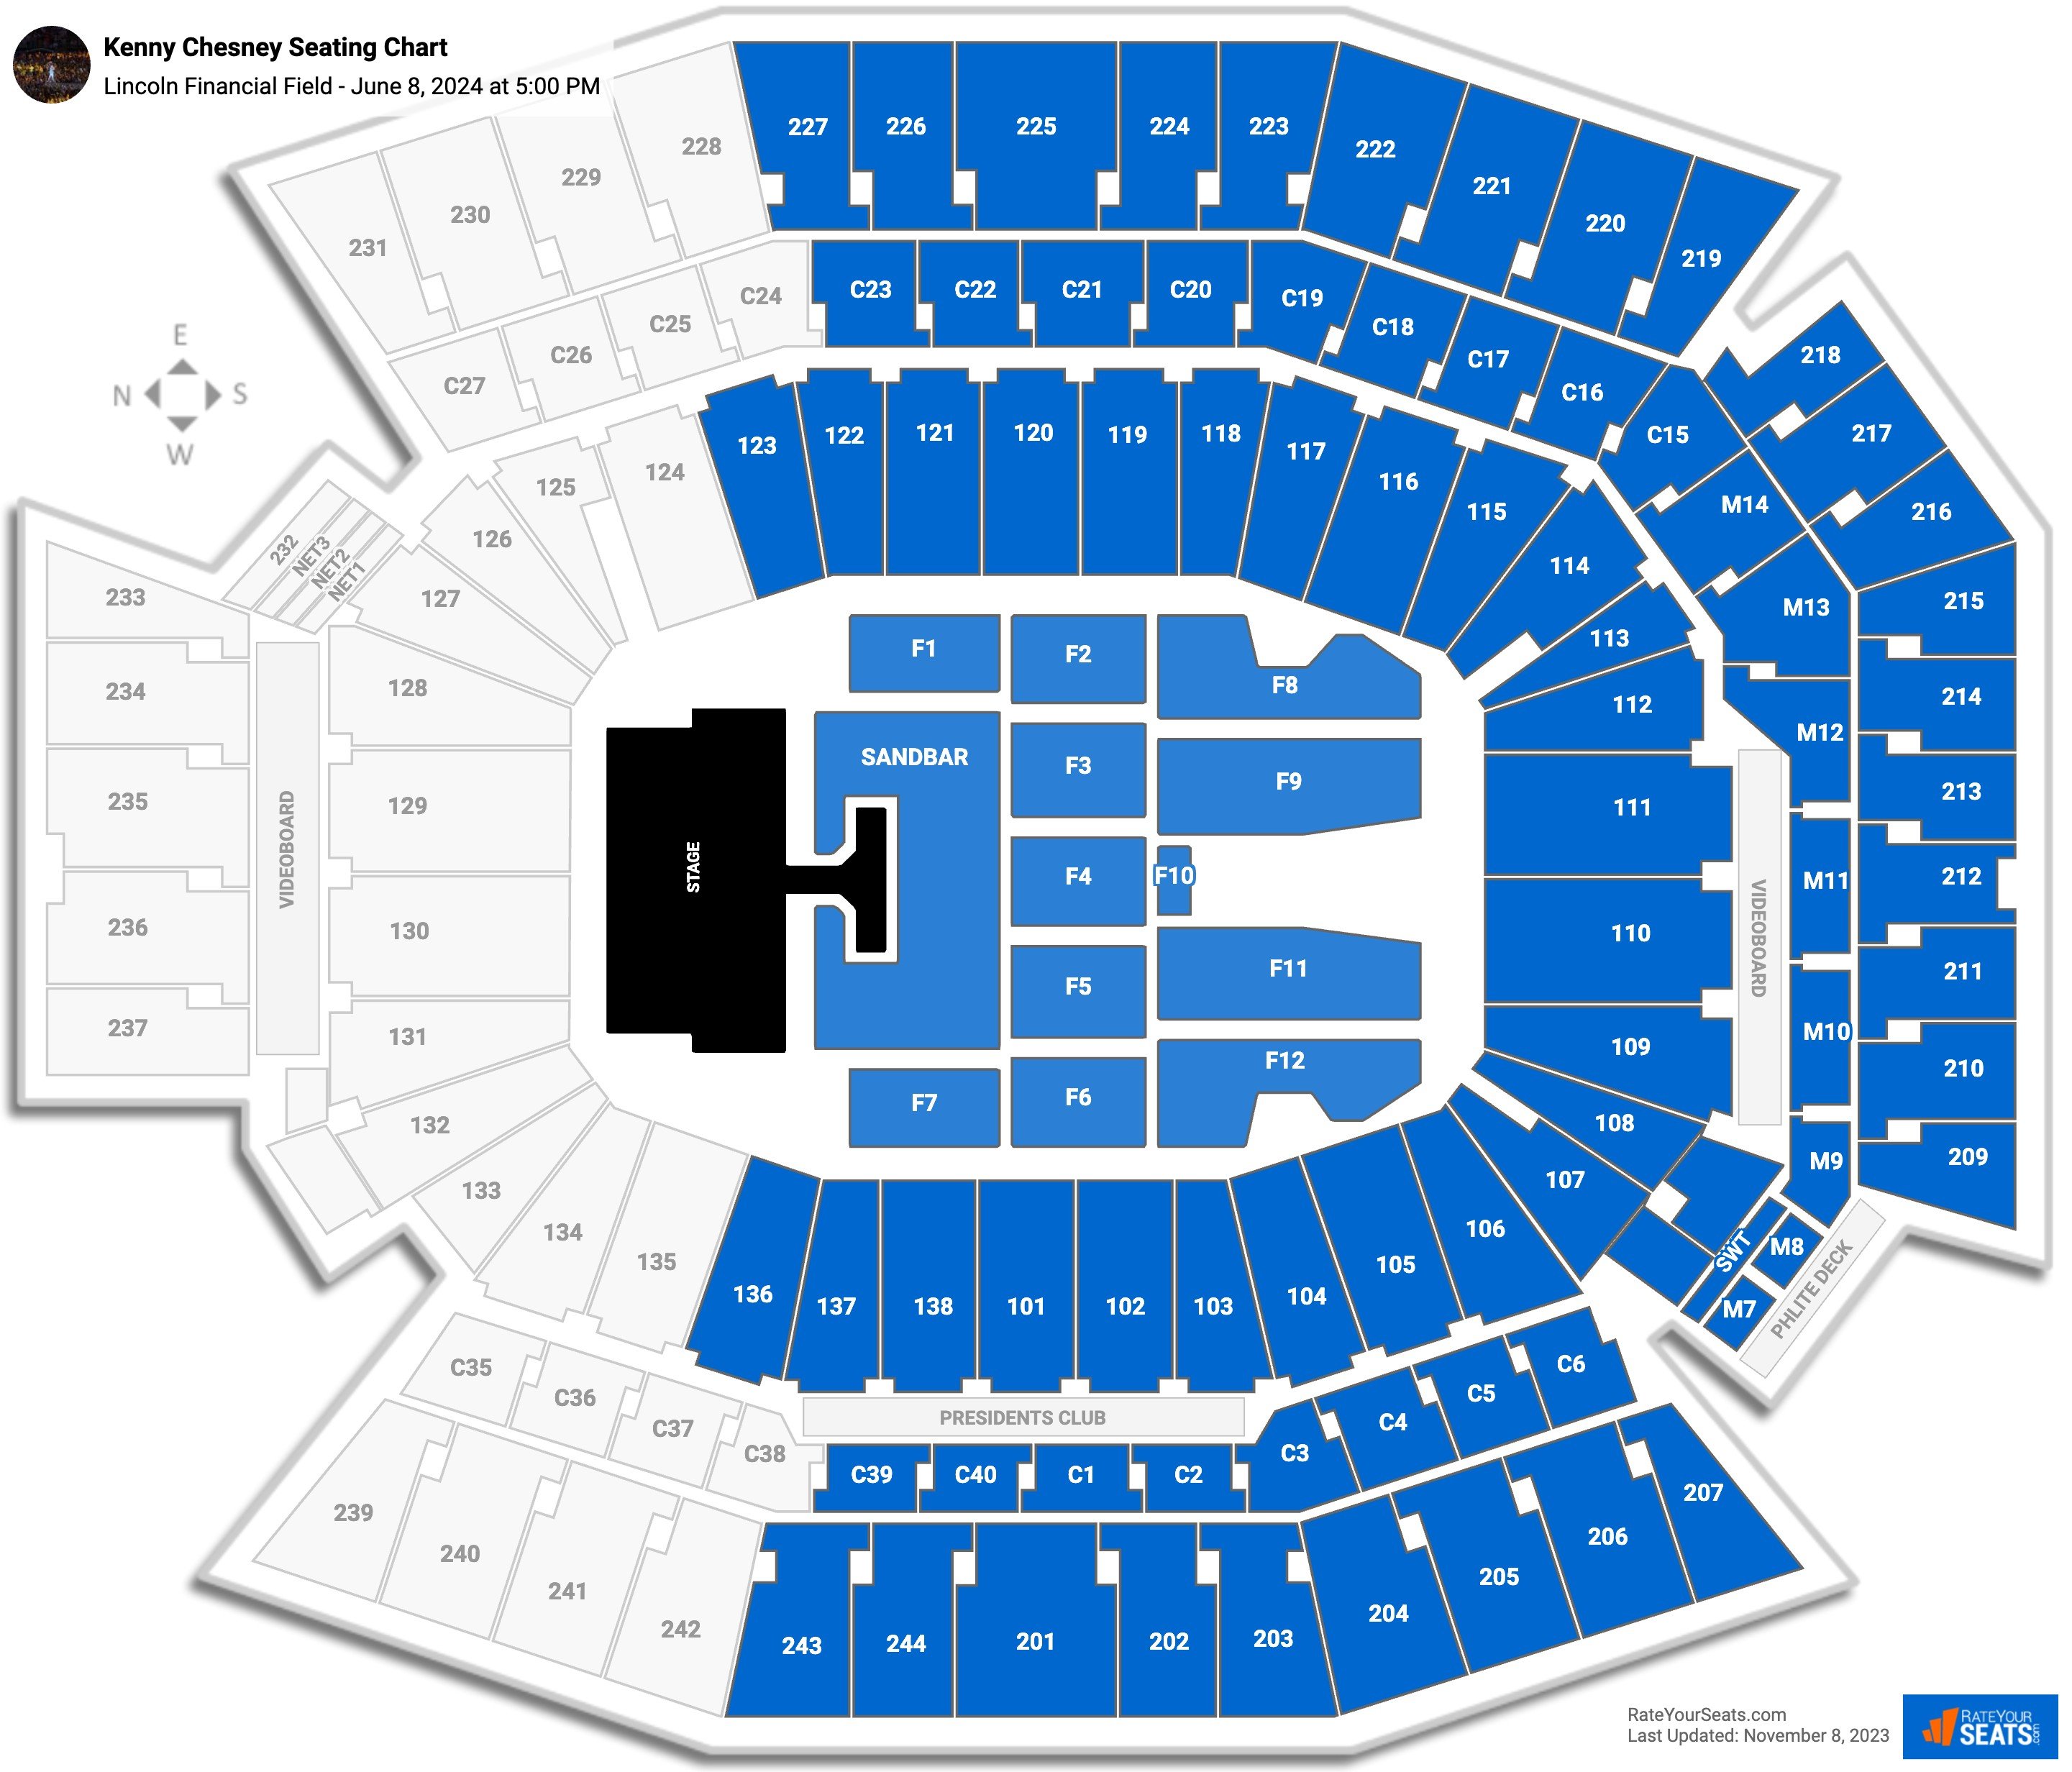 Kenny Chesney seating chart Lincoln Financial Field